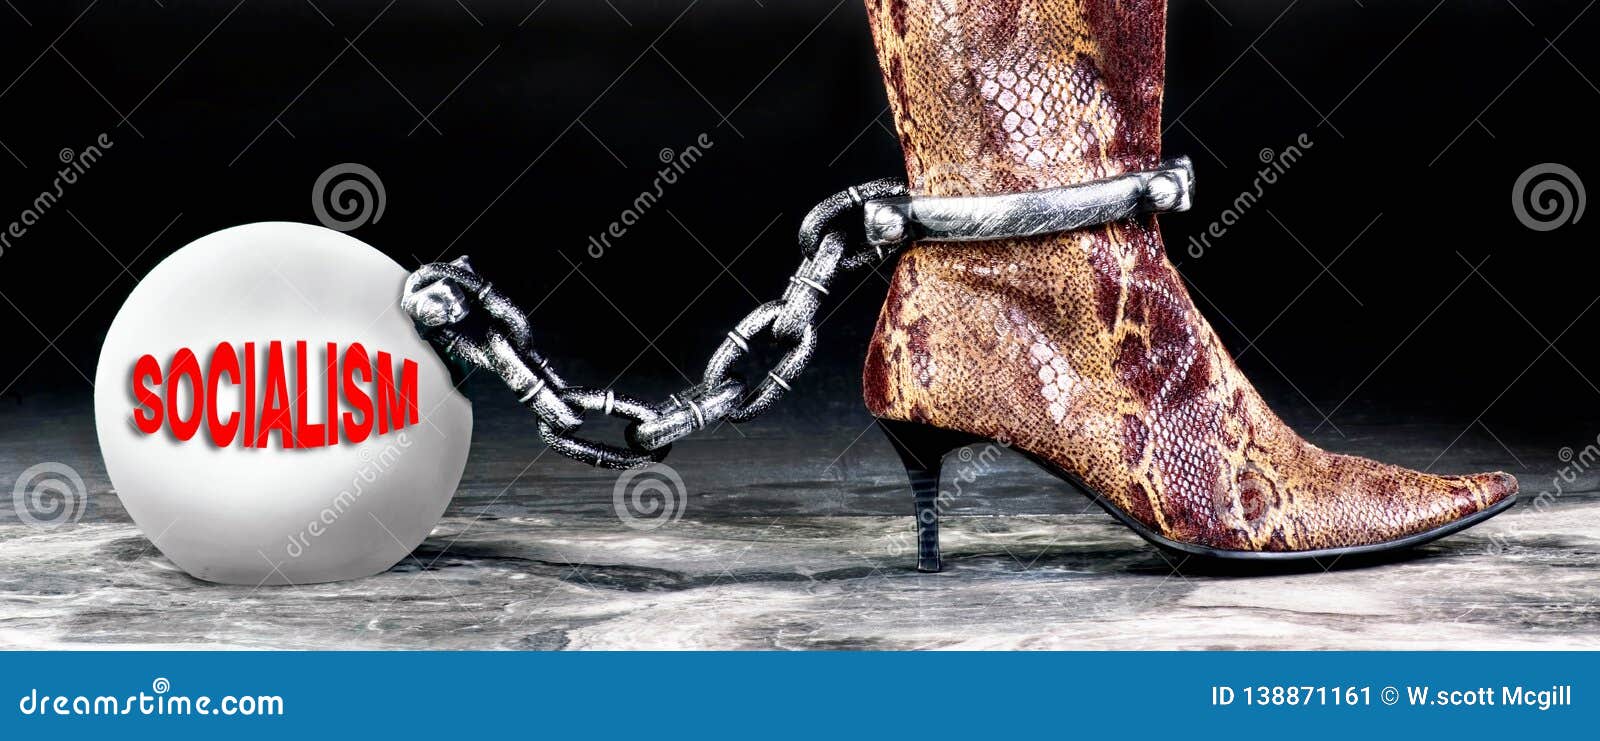 socialism the new ball and chain